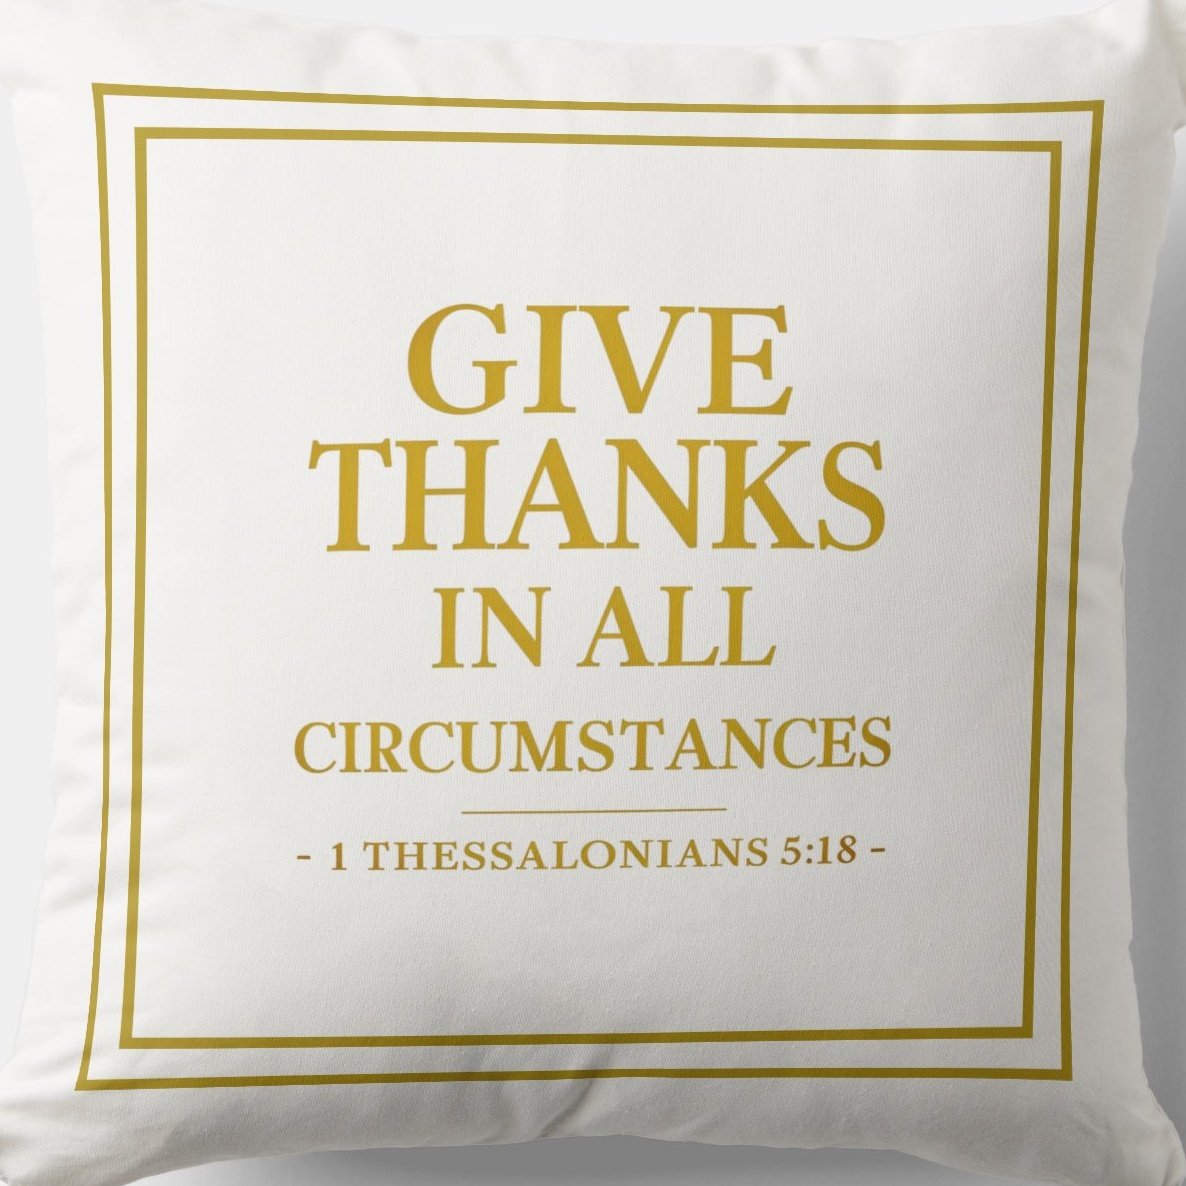 Give Thanks In All Circumstances zazzle.com/give_thanks_in… Sacred Message #Pillow #Blessing #JesusChrist #JesusSaves #Jesus #christian #spiritual #Homedecoration #uniquegift #giftideas #MothersDayGifts #giftformom #giftidea #HolySpirit #pillows #giftshop #giftsforher #giftsformom